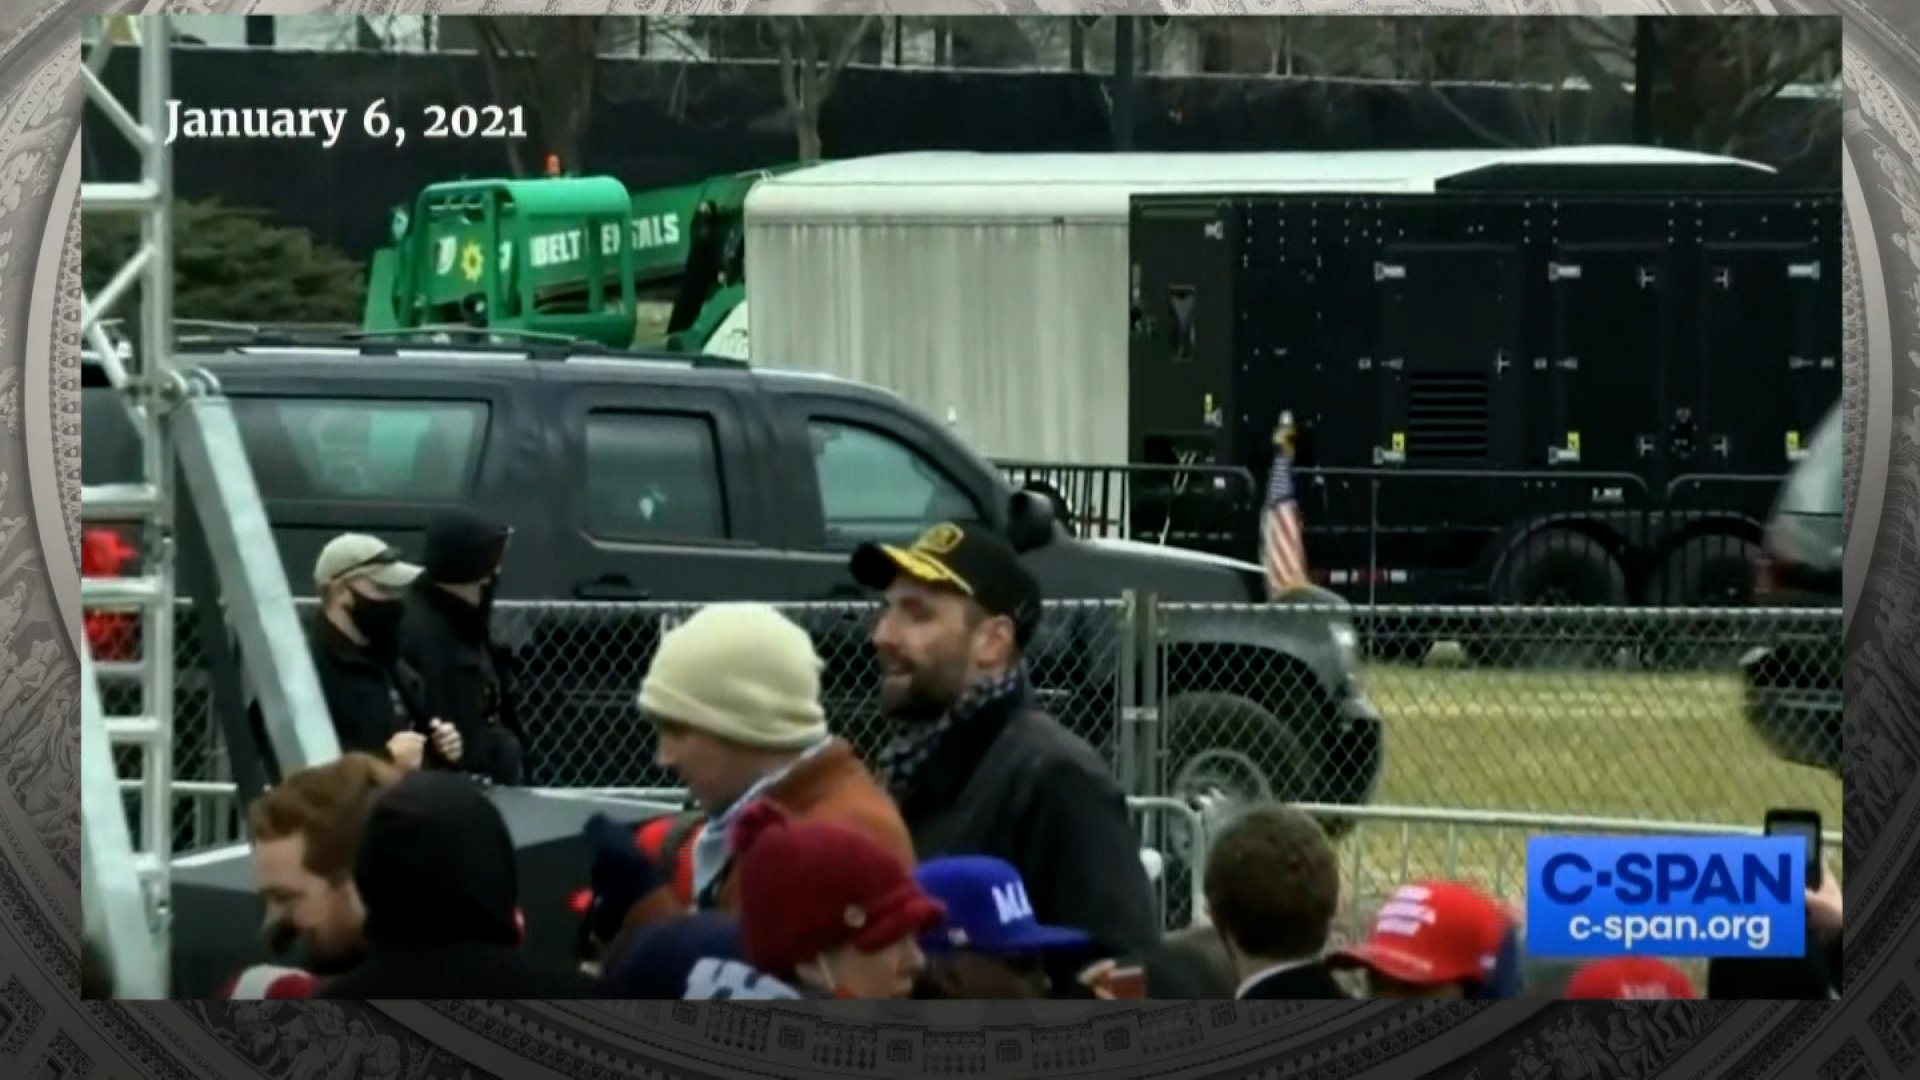 Video footage shown by the House Select Committee shows President Donald Trump's motorcade leaving the rally on January 6, 2021.